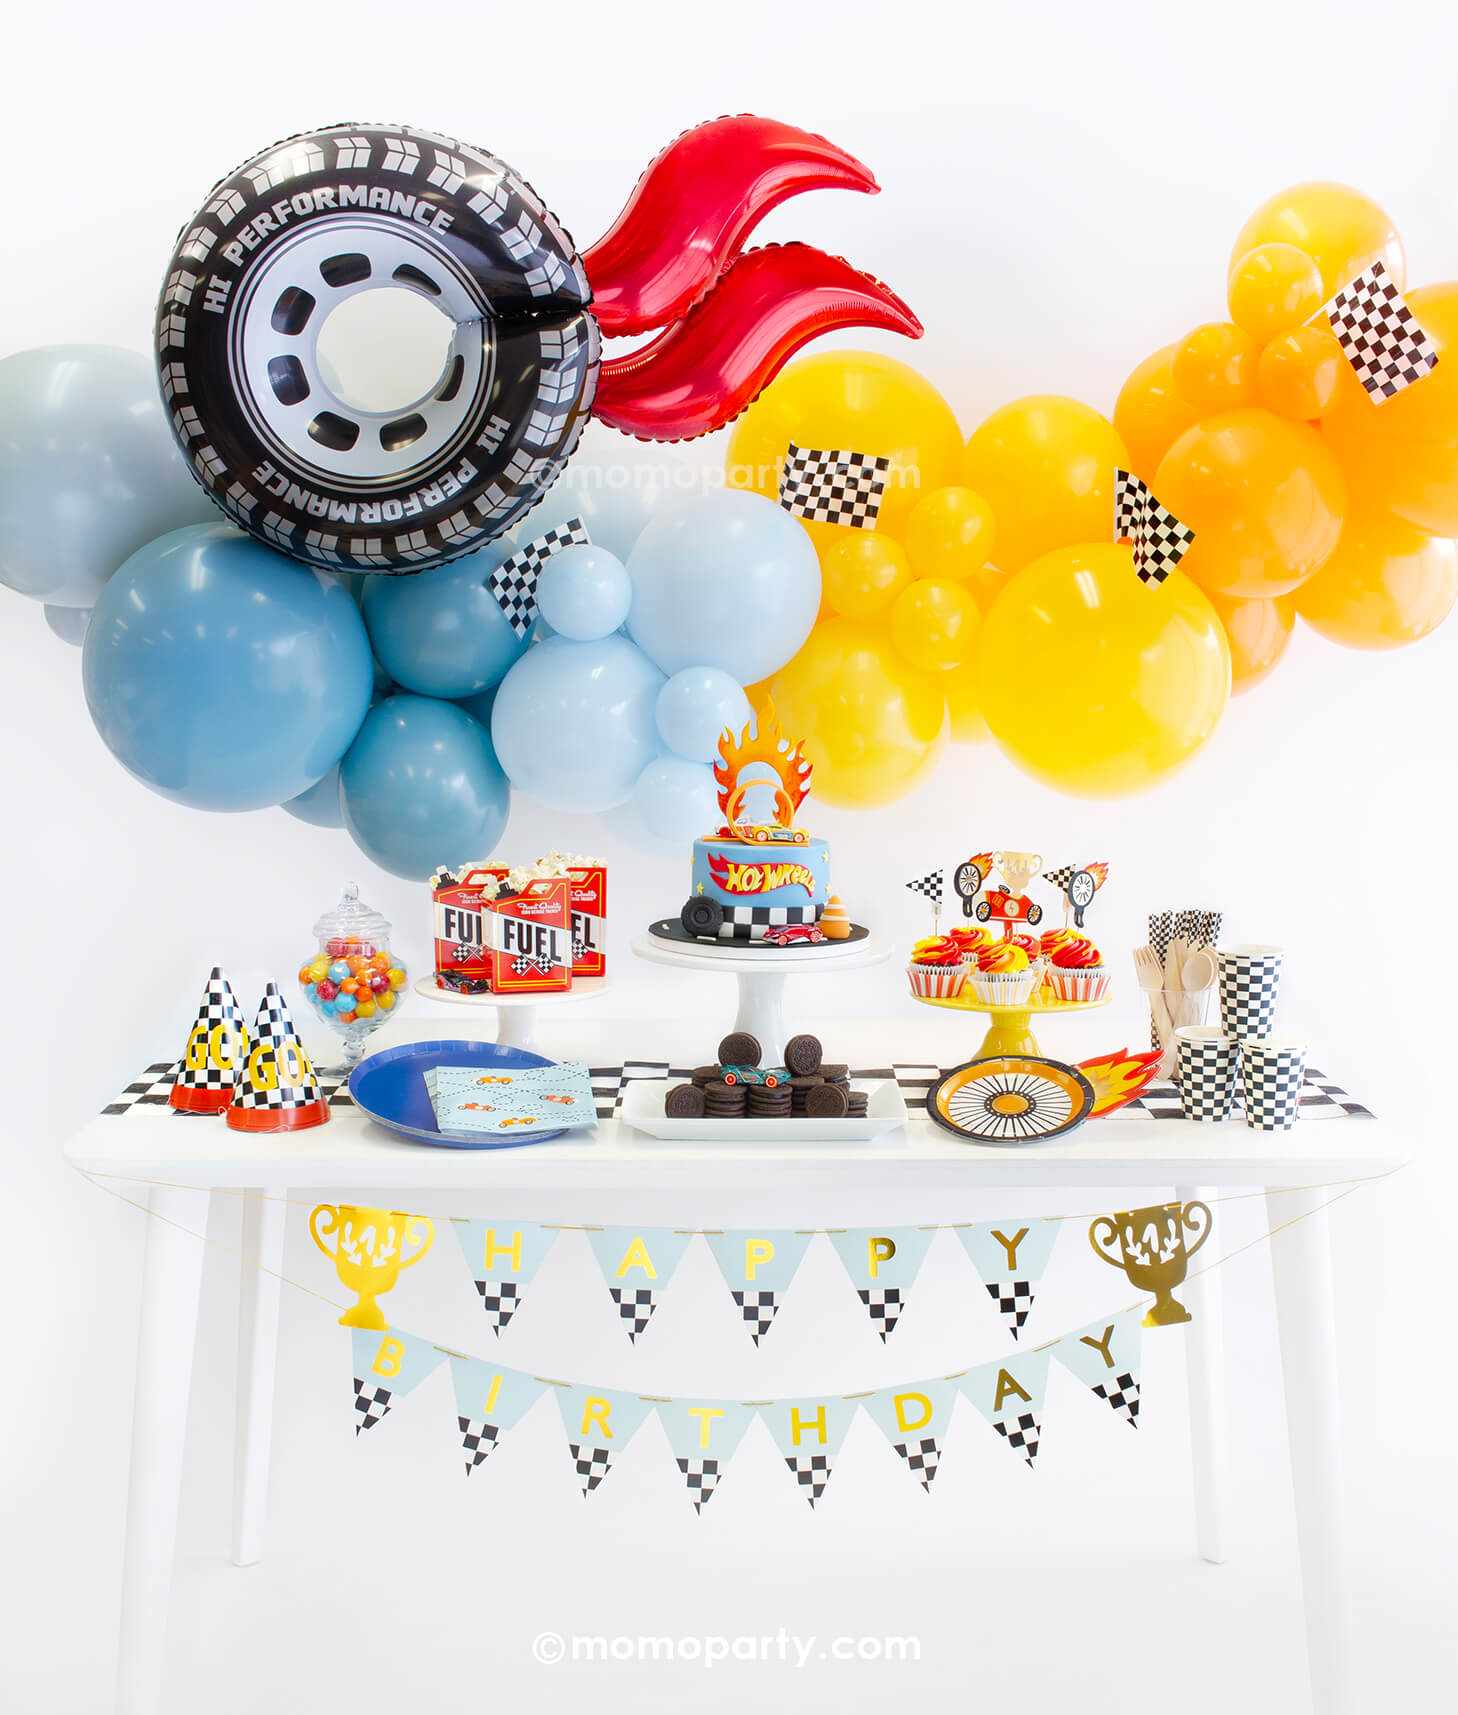 Momo Party's Hot Wheel Party Box featuring a orange and blue organic balloon garland topped with race car checkered flags and wheel shaped foil balloon with red flame. On the table there are wheel shaped plates, midnight blue dinner plates, race car blue napkins, checkered party cups, birthday hats and cupcake topped with race car themed toppers. In the middle is a fondant Hot Wheels birthday cake, along with the trophy HBD banner, a perfect party inspiration for boy's Hot Wheels themed birthday party.